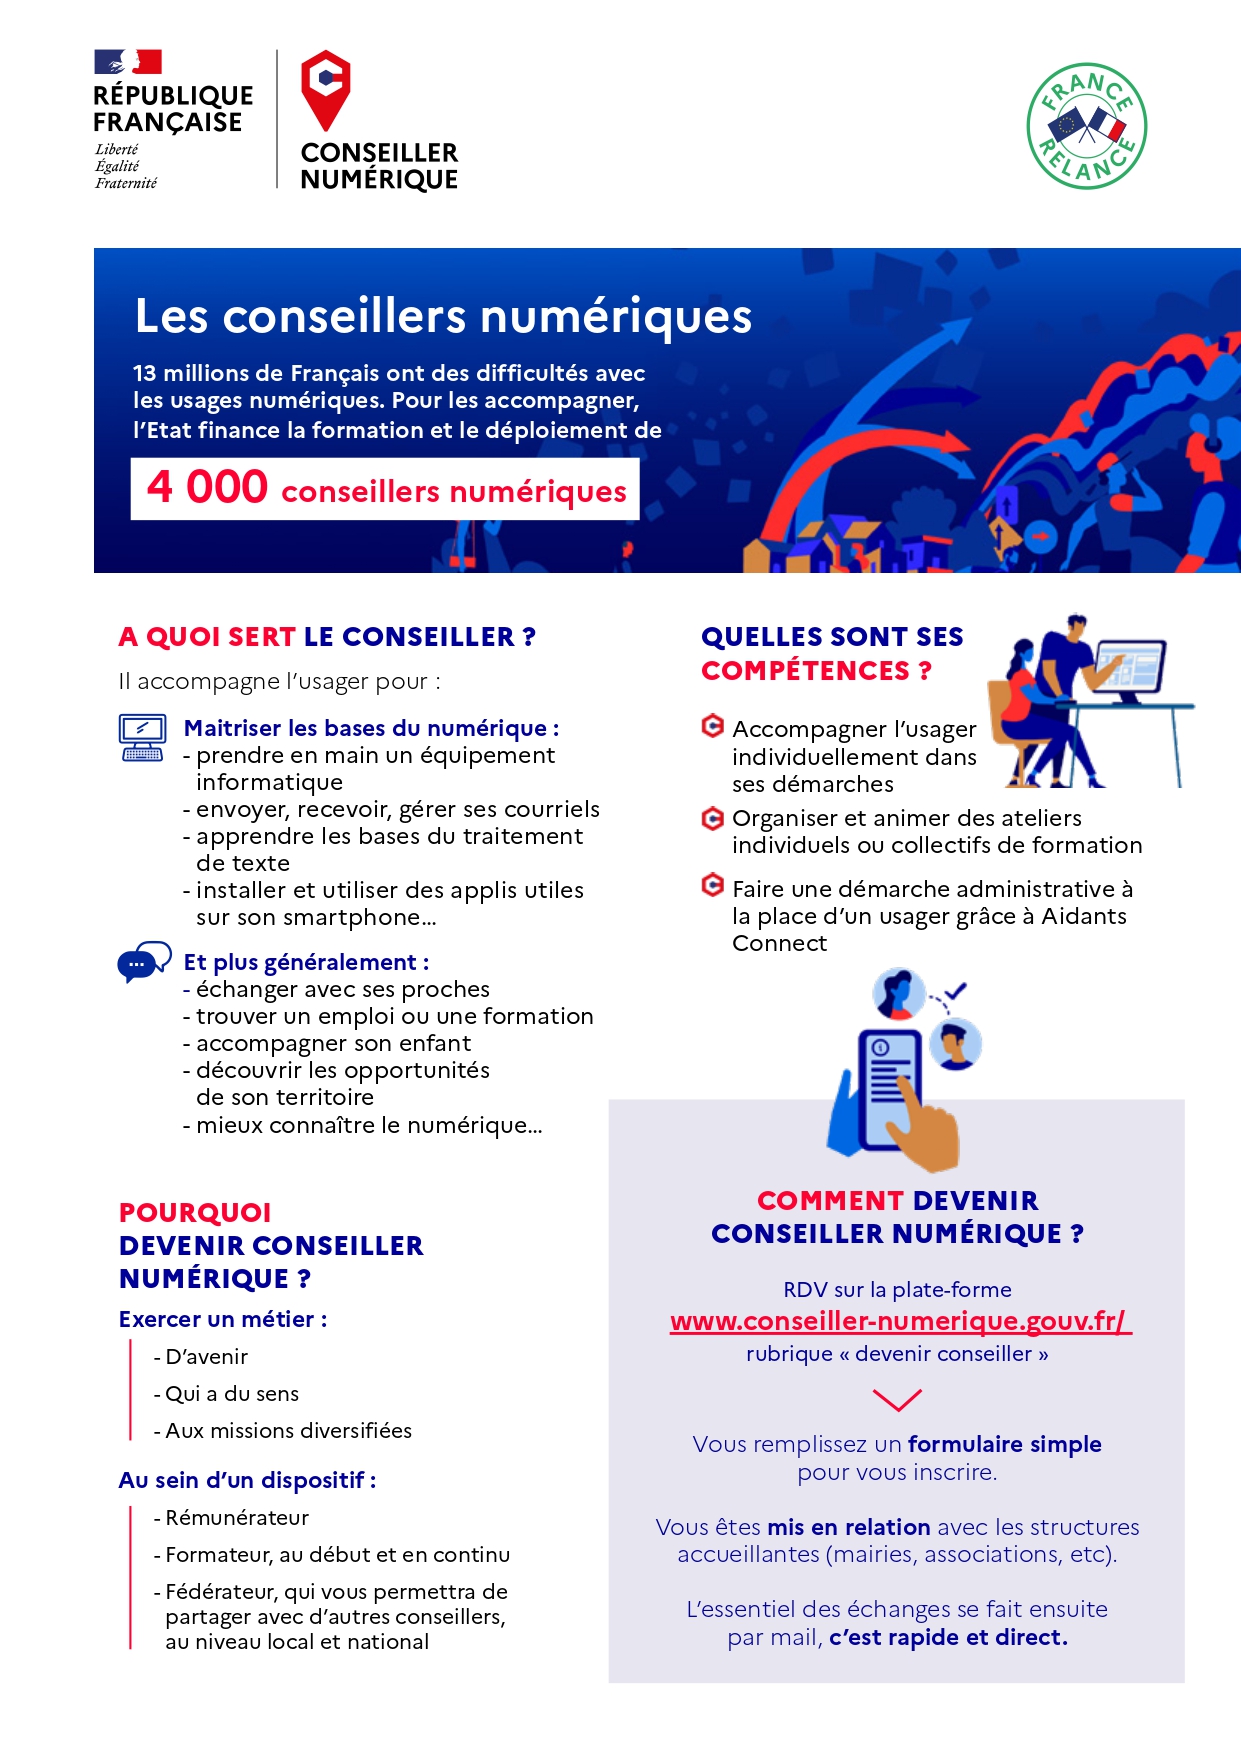 ConseillersNumeriques_Flyer_v3_page-0001.jpg